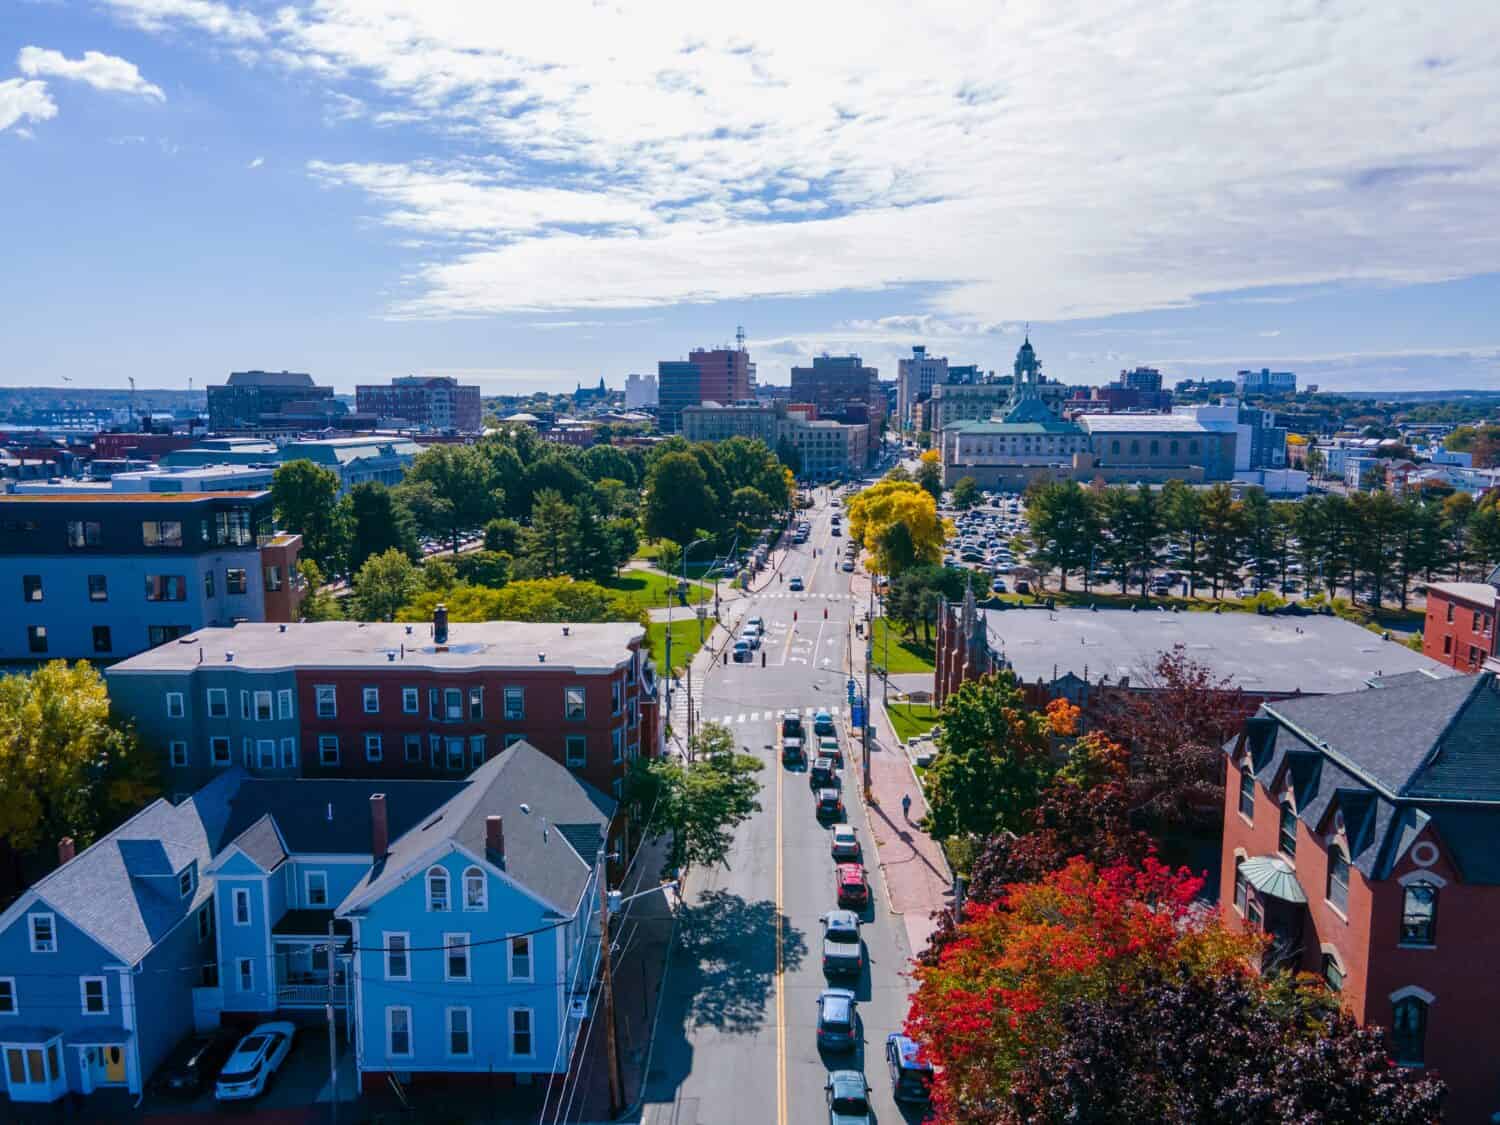 Aerial view of Portland historic downtown skyline on Congress Street, viewed from Munjoy Hill, Portland, Maine ME, USA. 